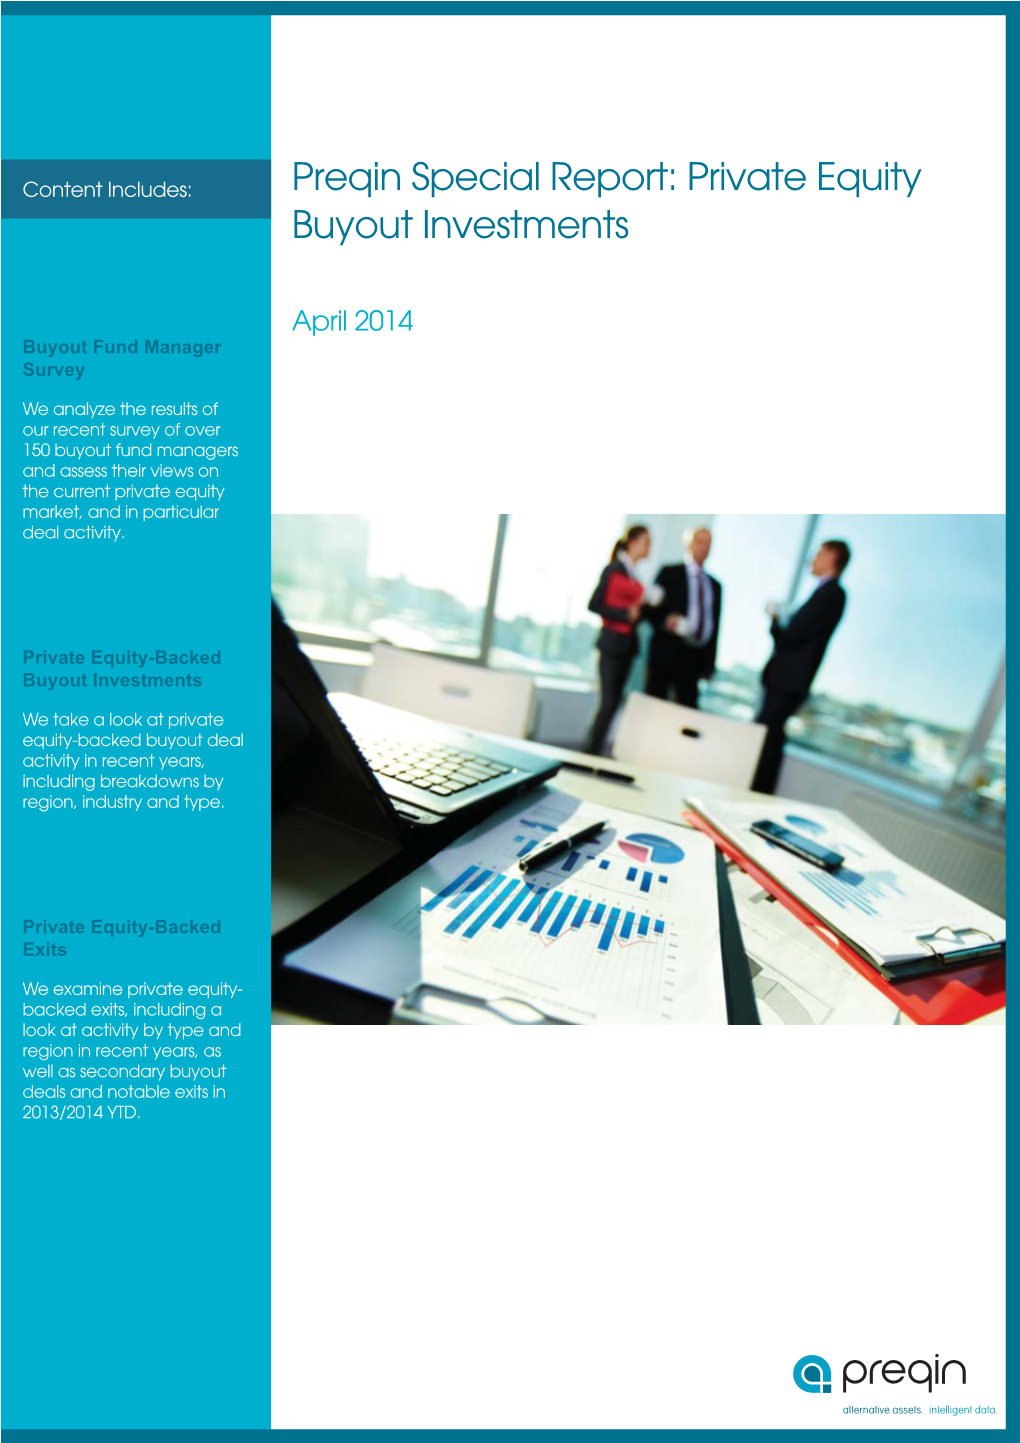 Preqin Special Report: Private Equity Buyout Investments